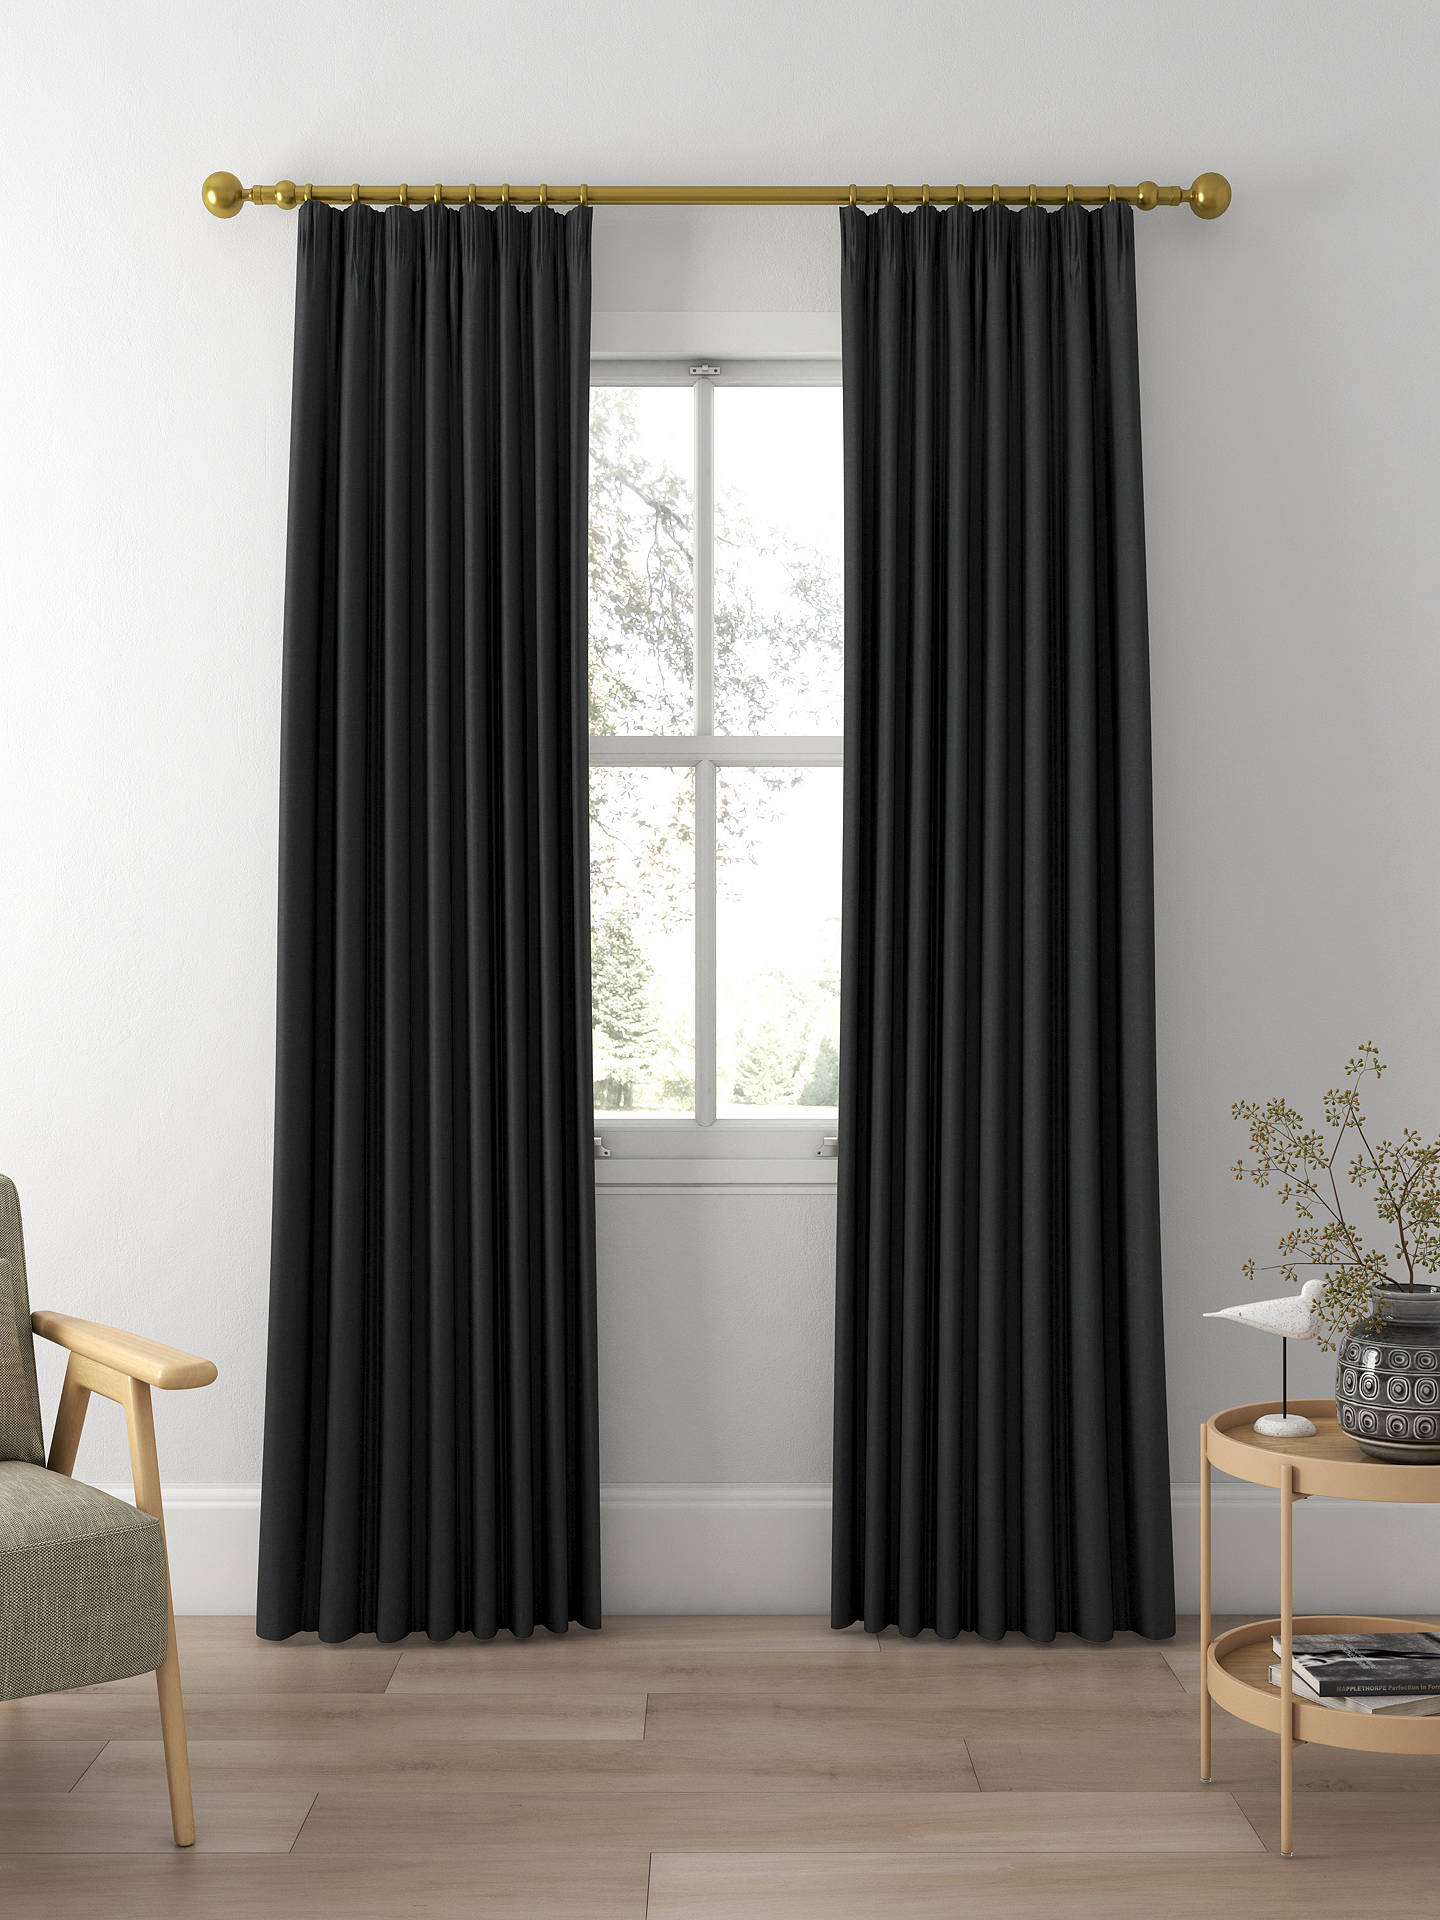 Laura Ashley Swanson Made to Measure Curtains, Charcoal